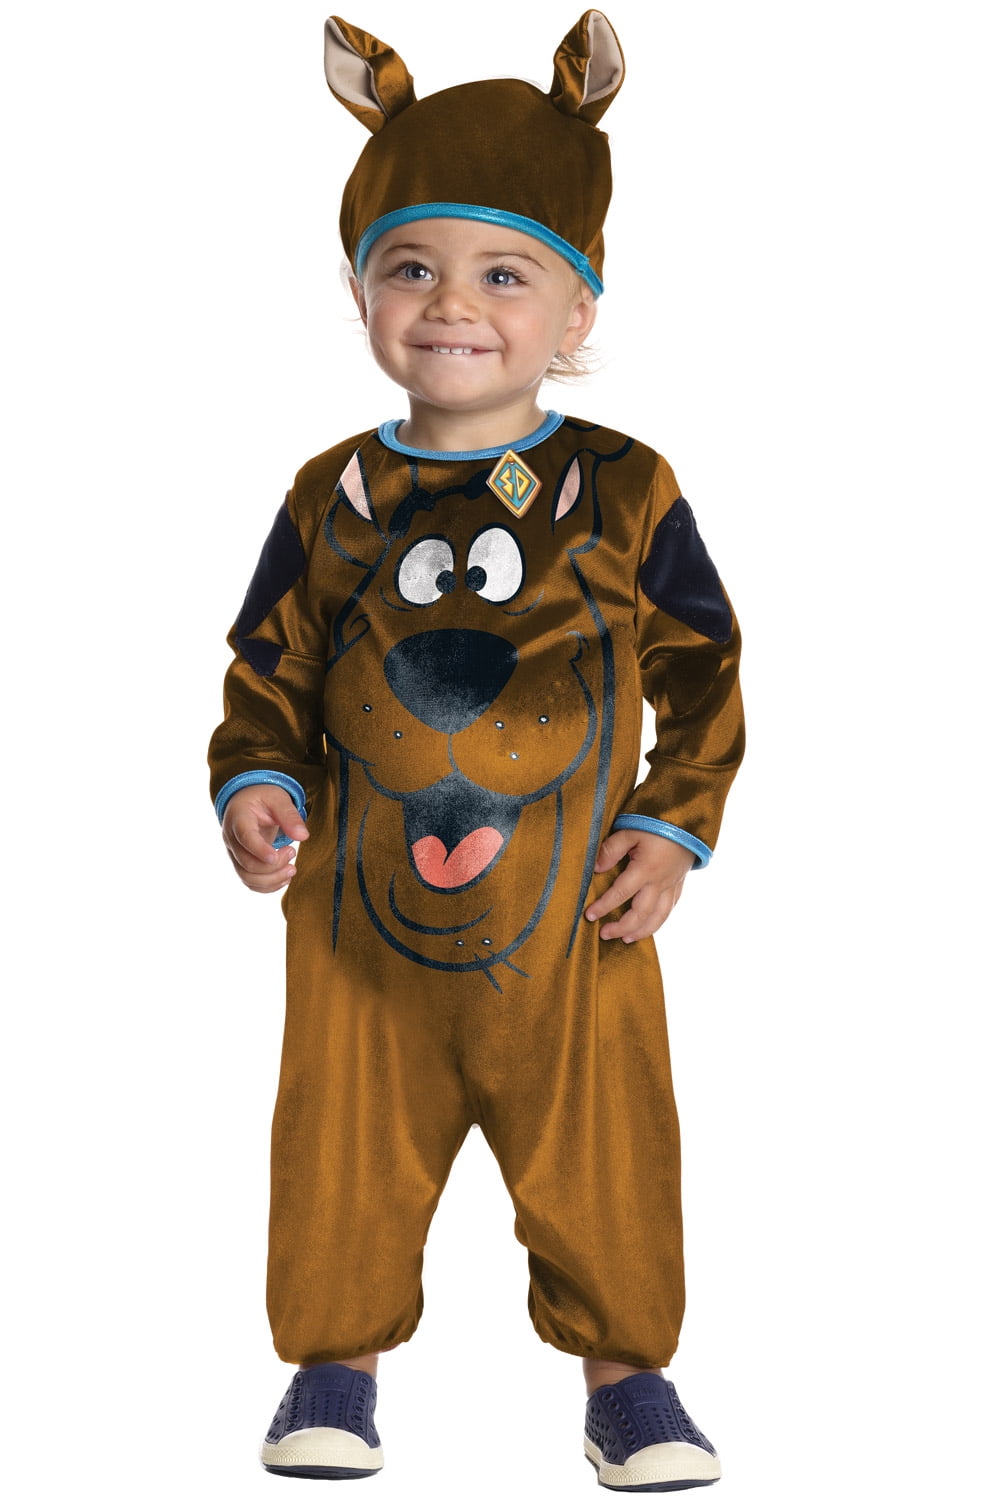 Brand New Scooby-Doo Infant Costume Pictures Dress up 0-6 Months New!!! 